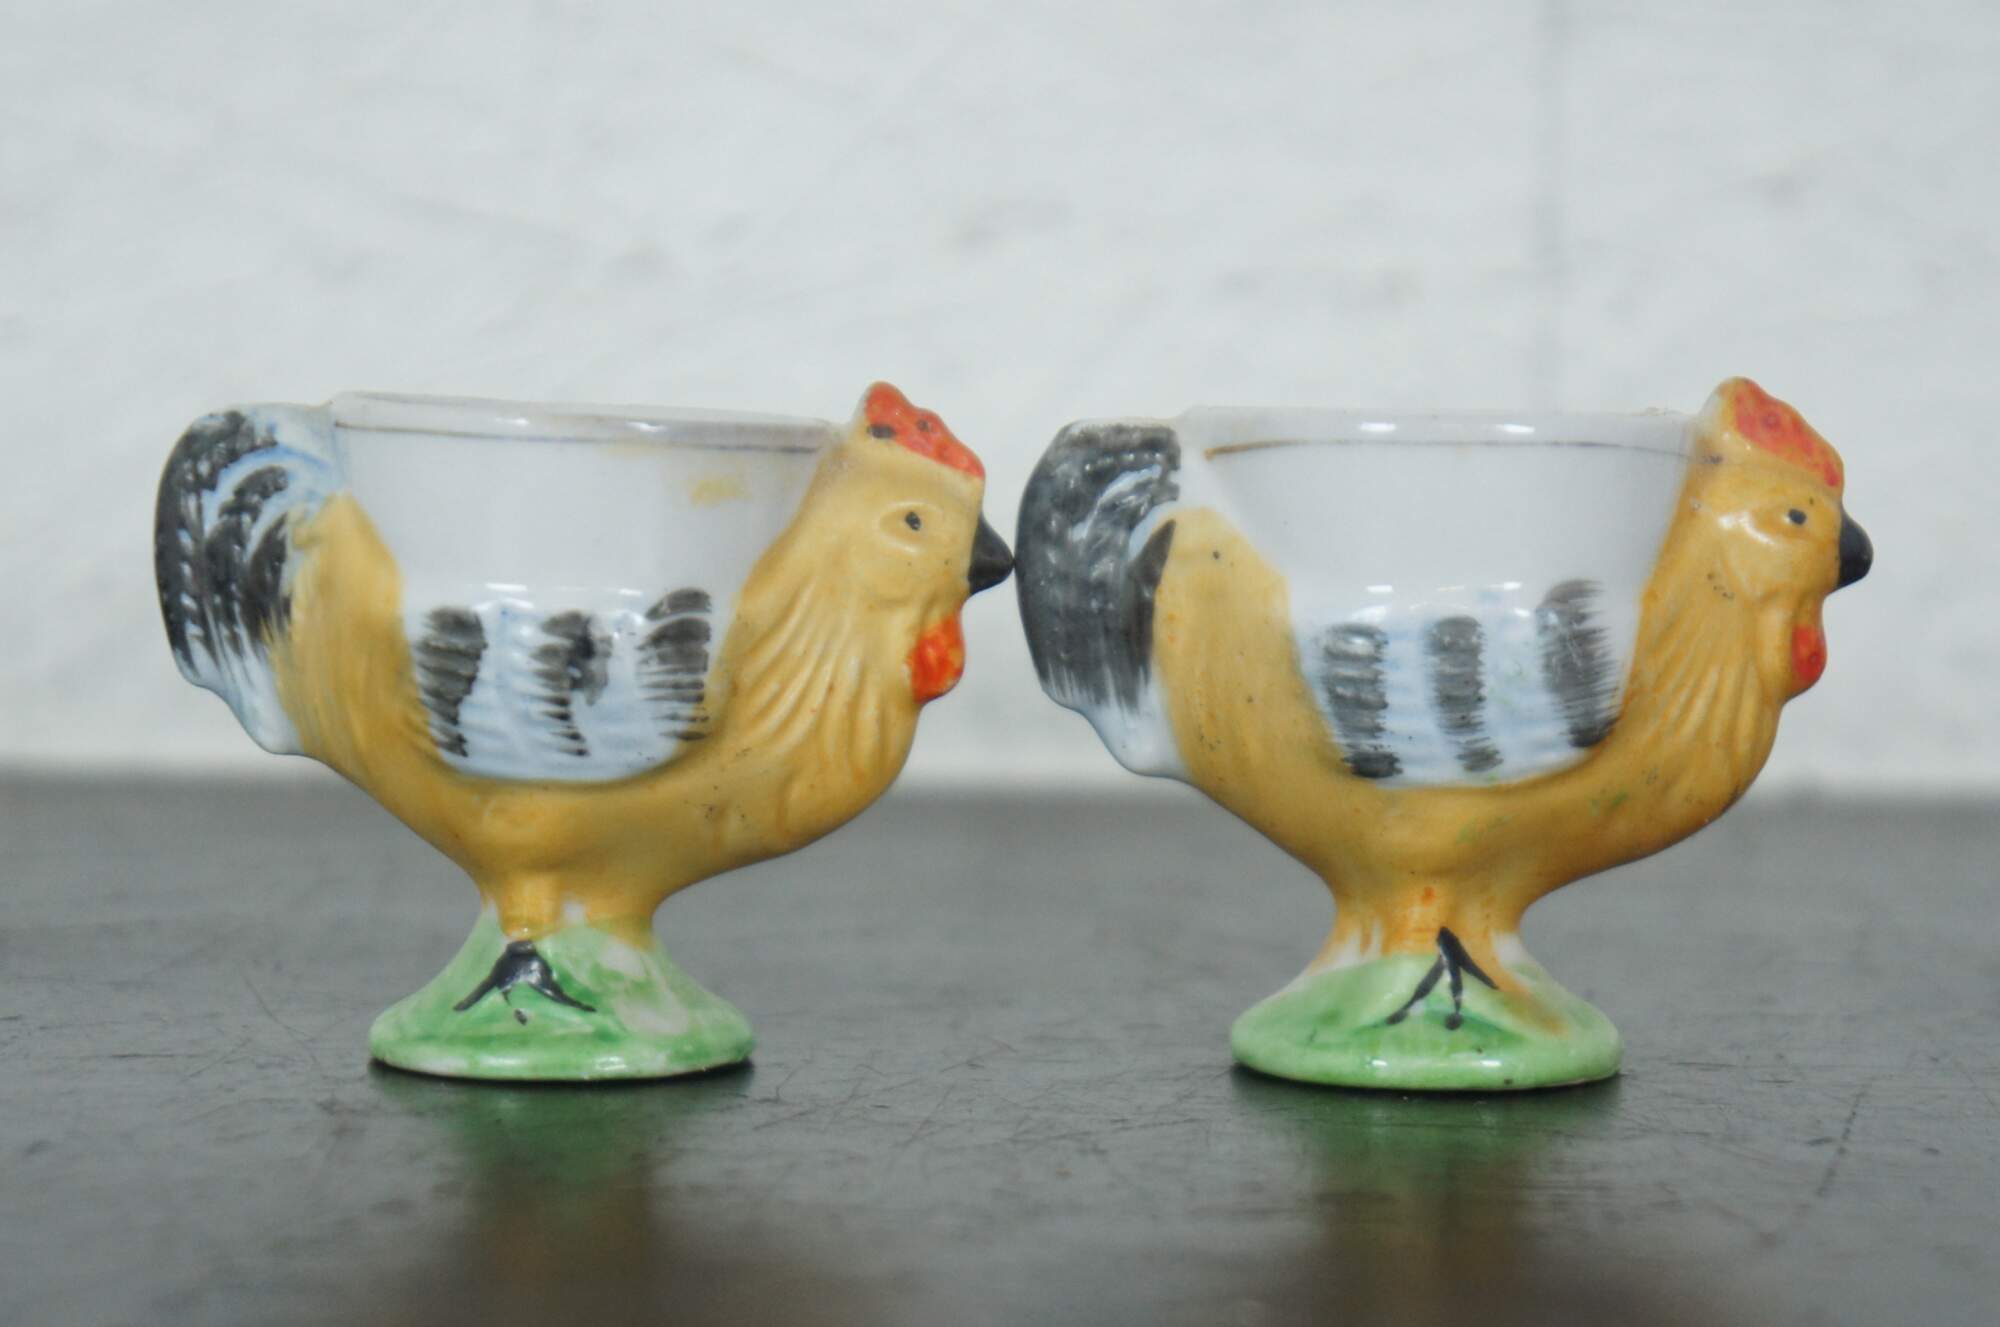 Vintage Ceramic Chicken Shaped Egg Cup, Made in Japan, Animal